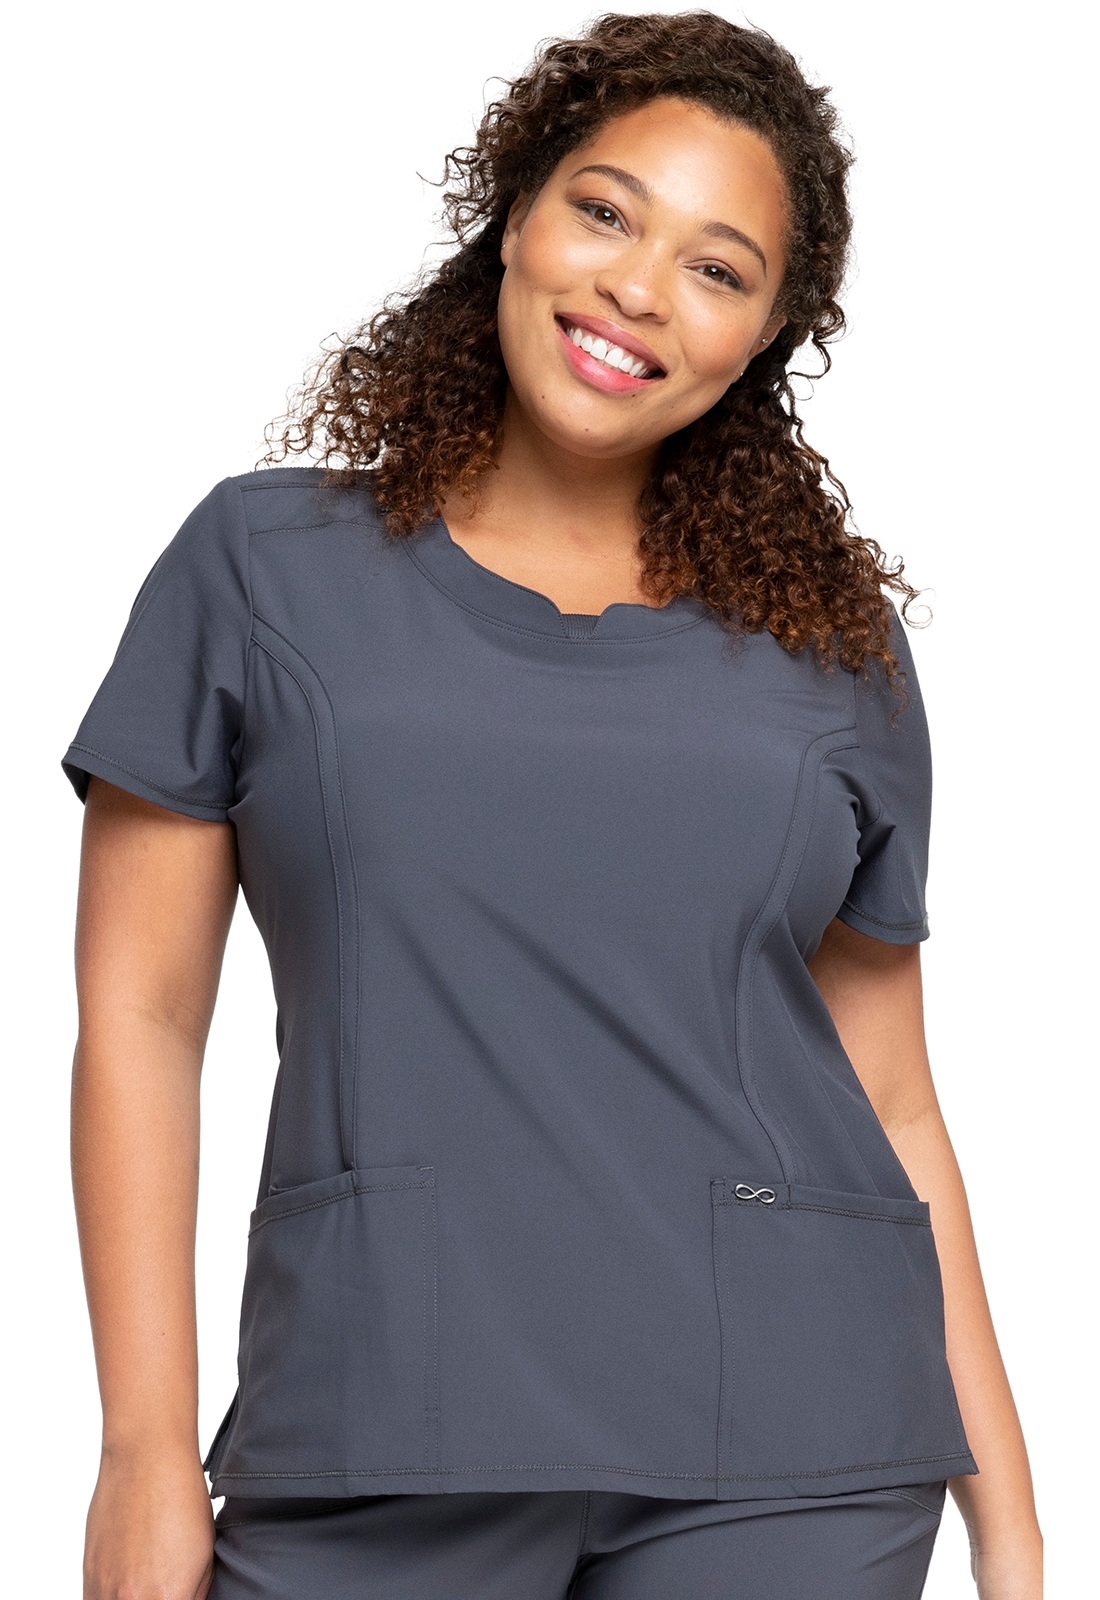 Cherokee Infinity Women's Round Neck Solid Scrub Top-2624A (Pewter - XX-Large)